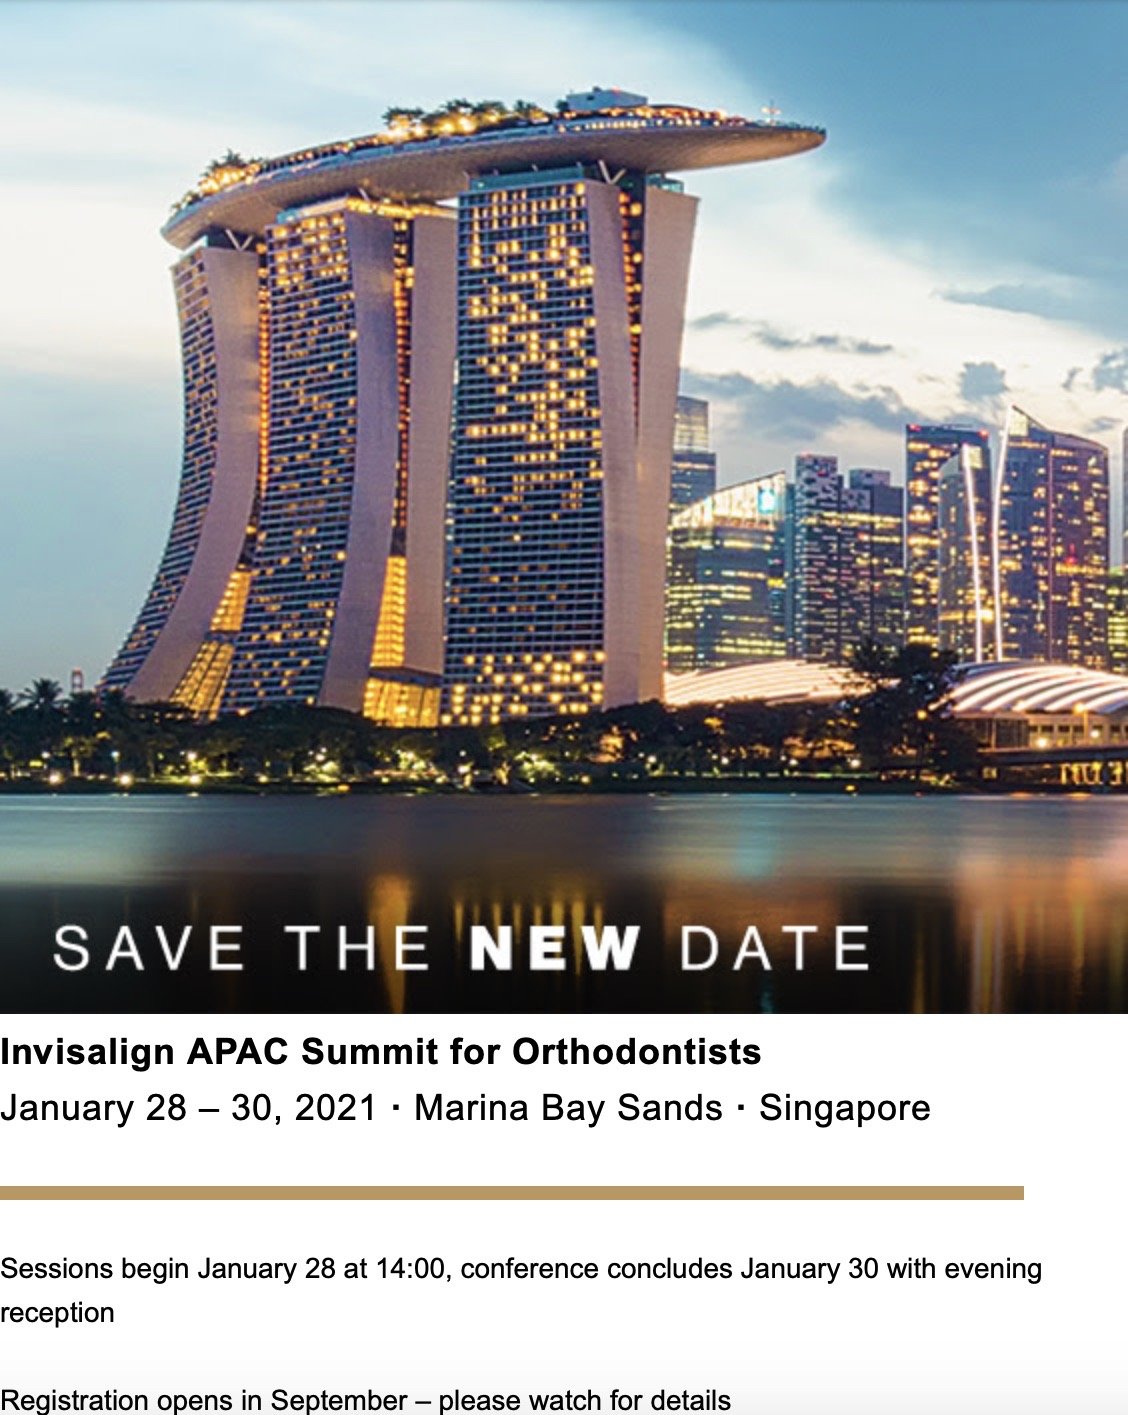 Invisalign APAC Summit for Orthodontists